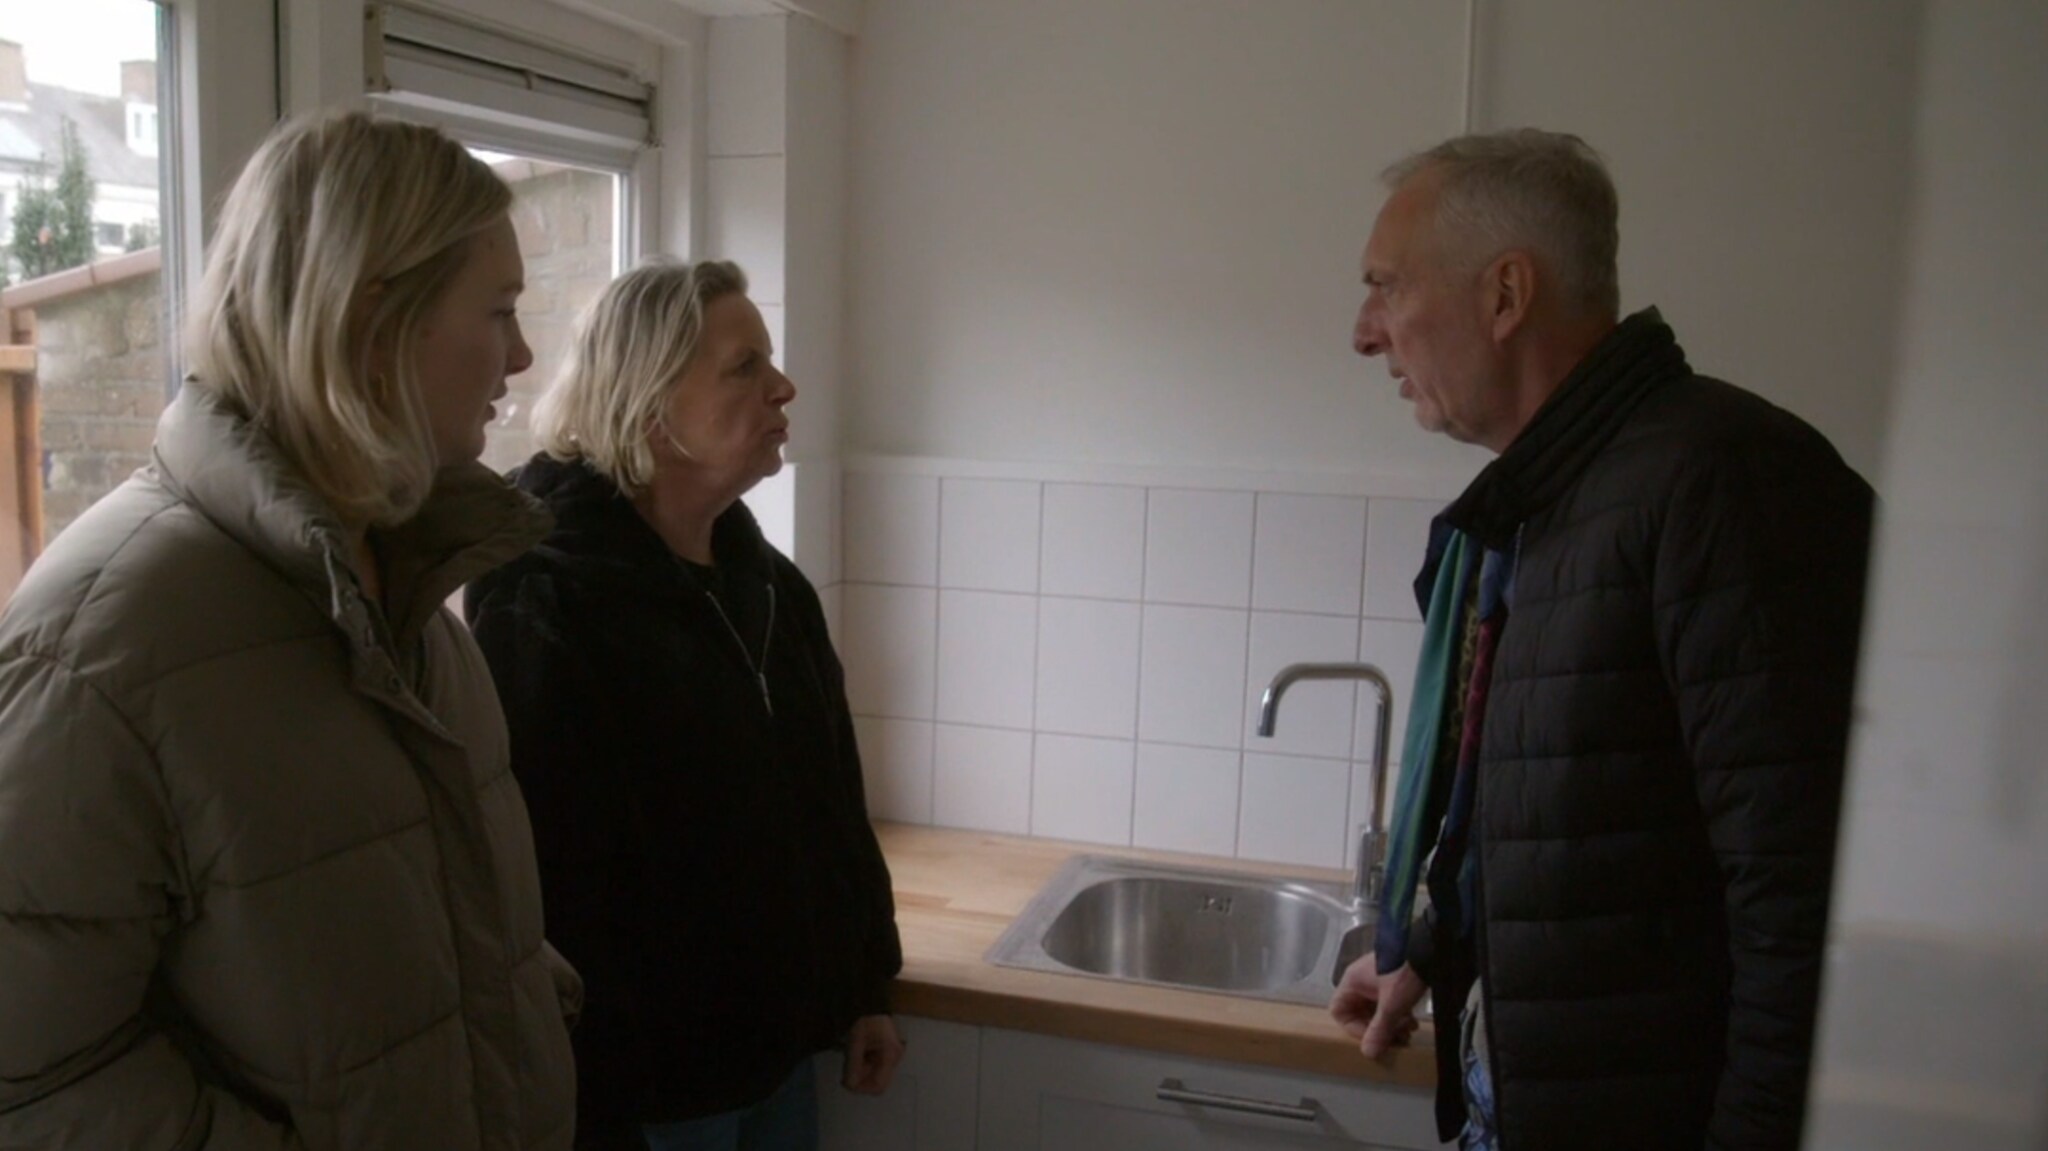 Château Beegandt viewers speak highly of the Meiland family: ‘So you really don’t understand’